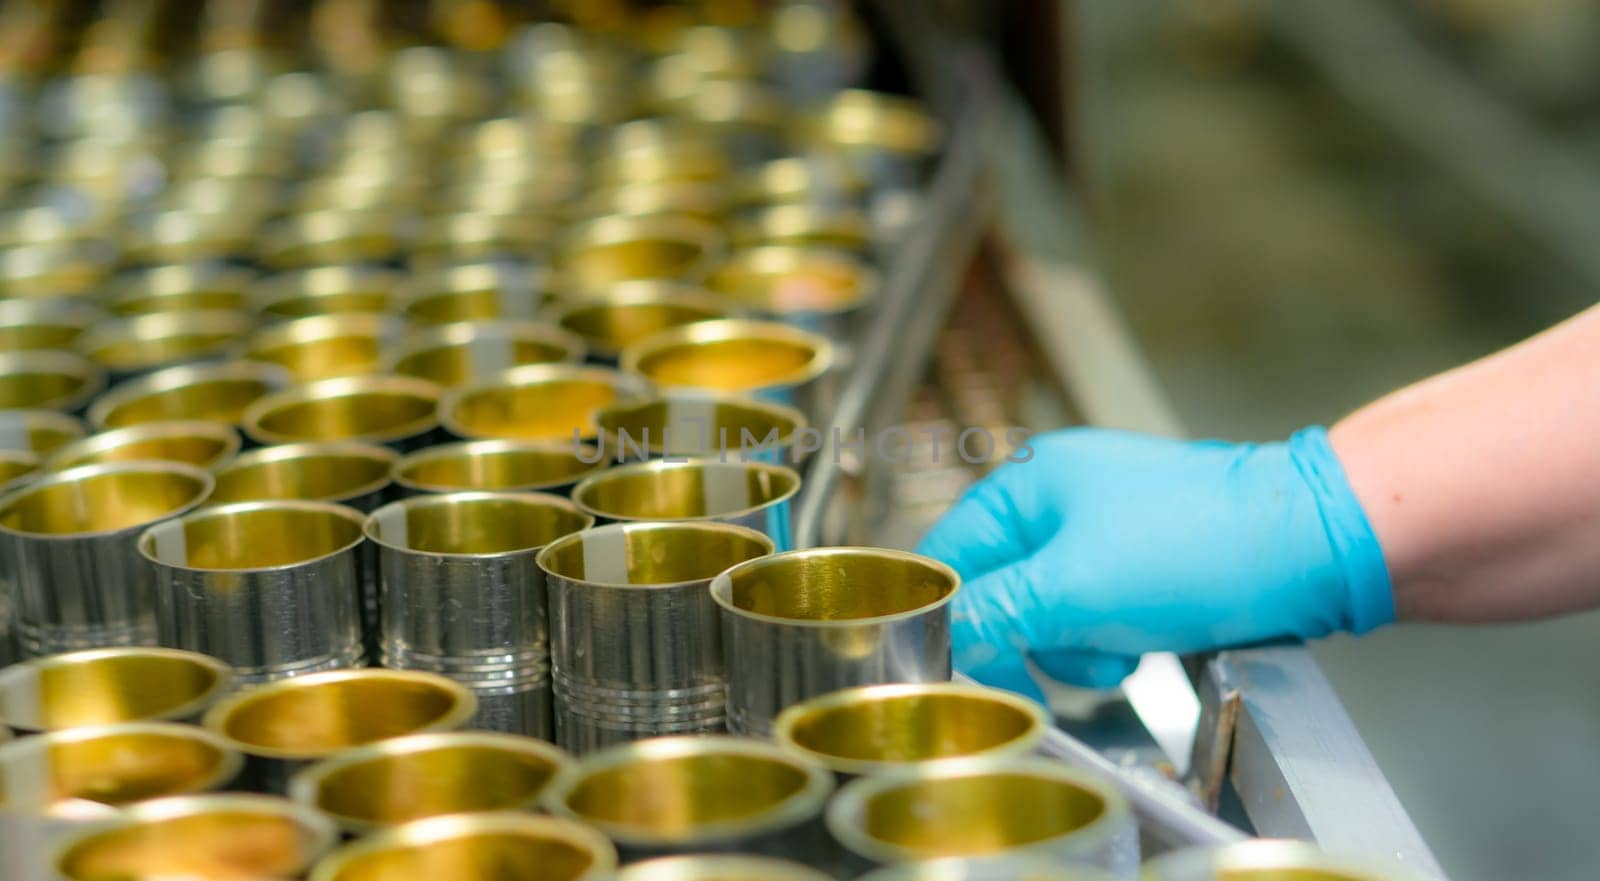 Selective focus on canned fish factory. Food industry. Food processing production line. Food manufacturing industry. Many can of sardines on a conveyor belt. Worker working in food processing factory. by Fahroni